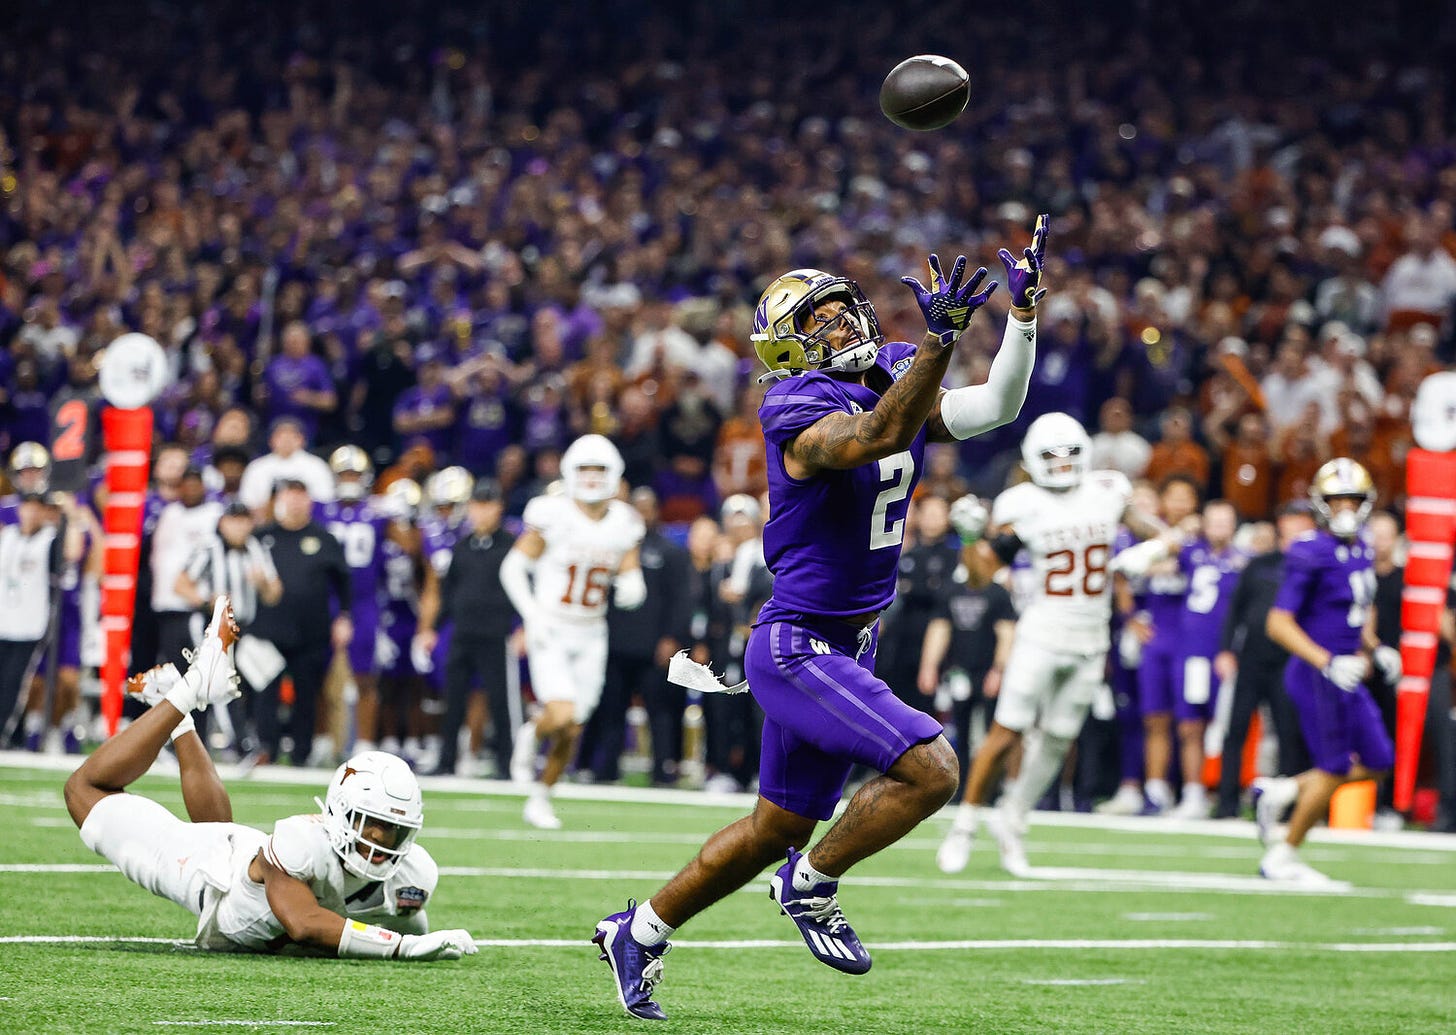 Huskies advance to national championship after hanging on for Sugar Bowl  win over Texas | The Daily Chronicle